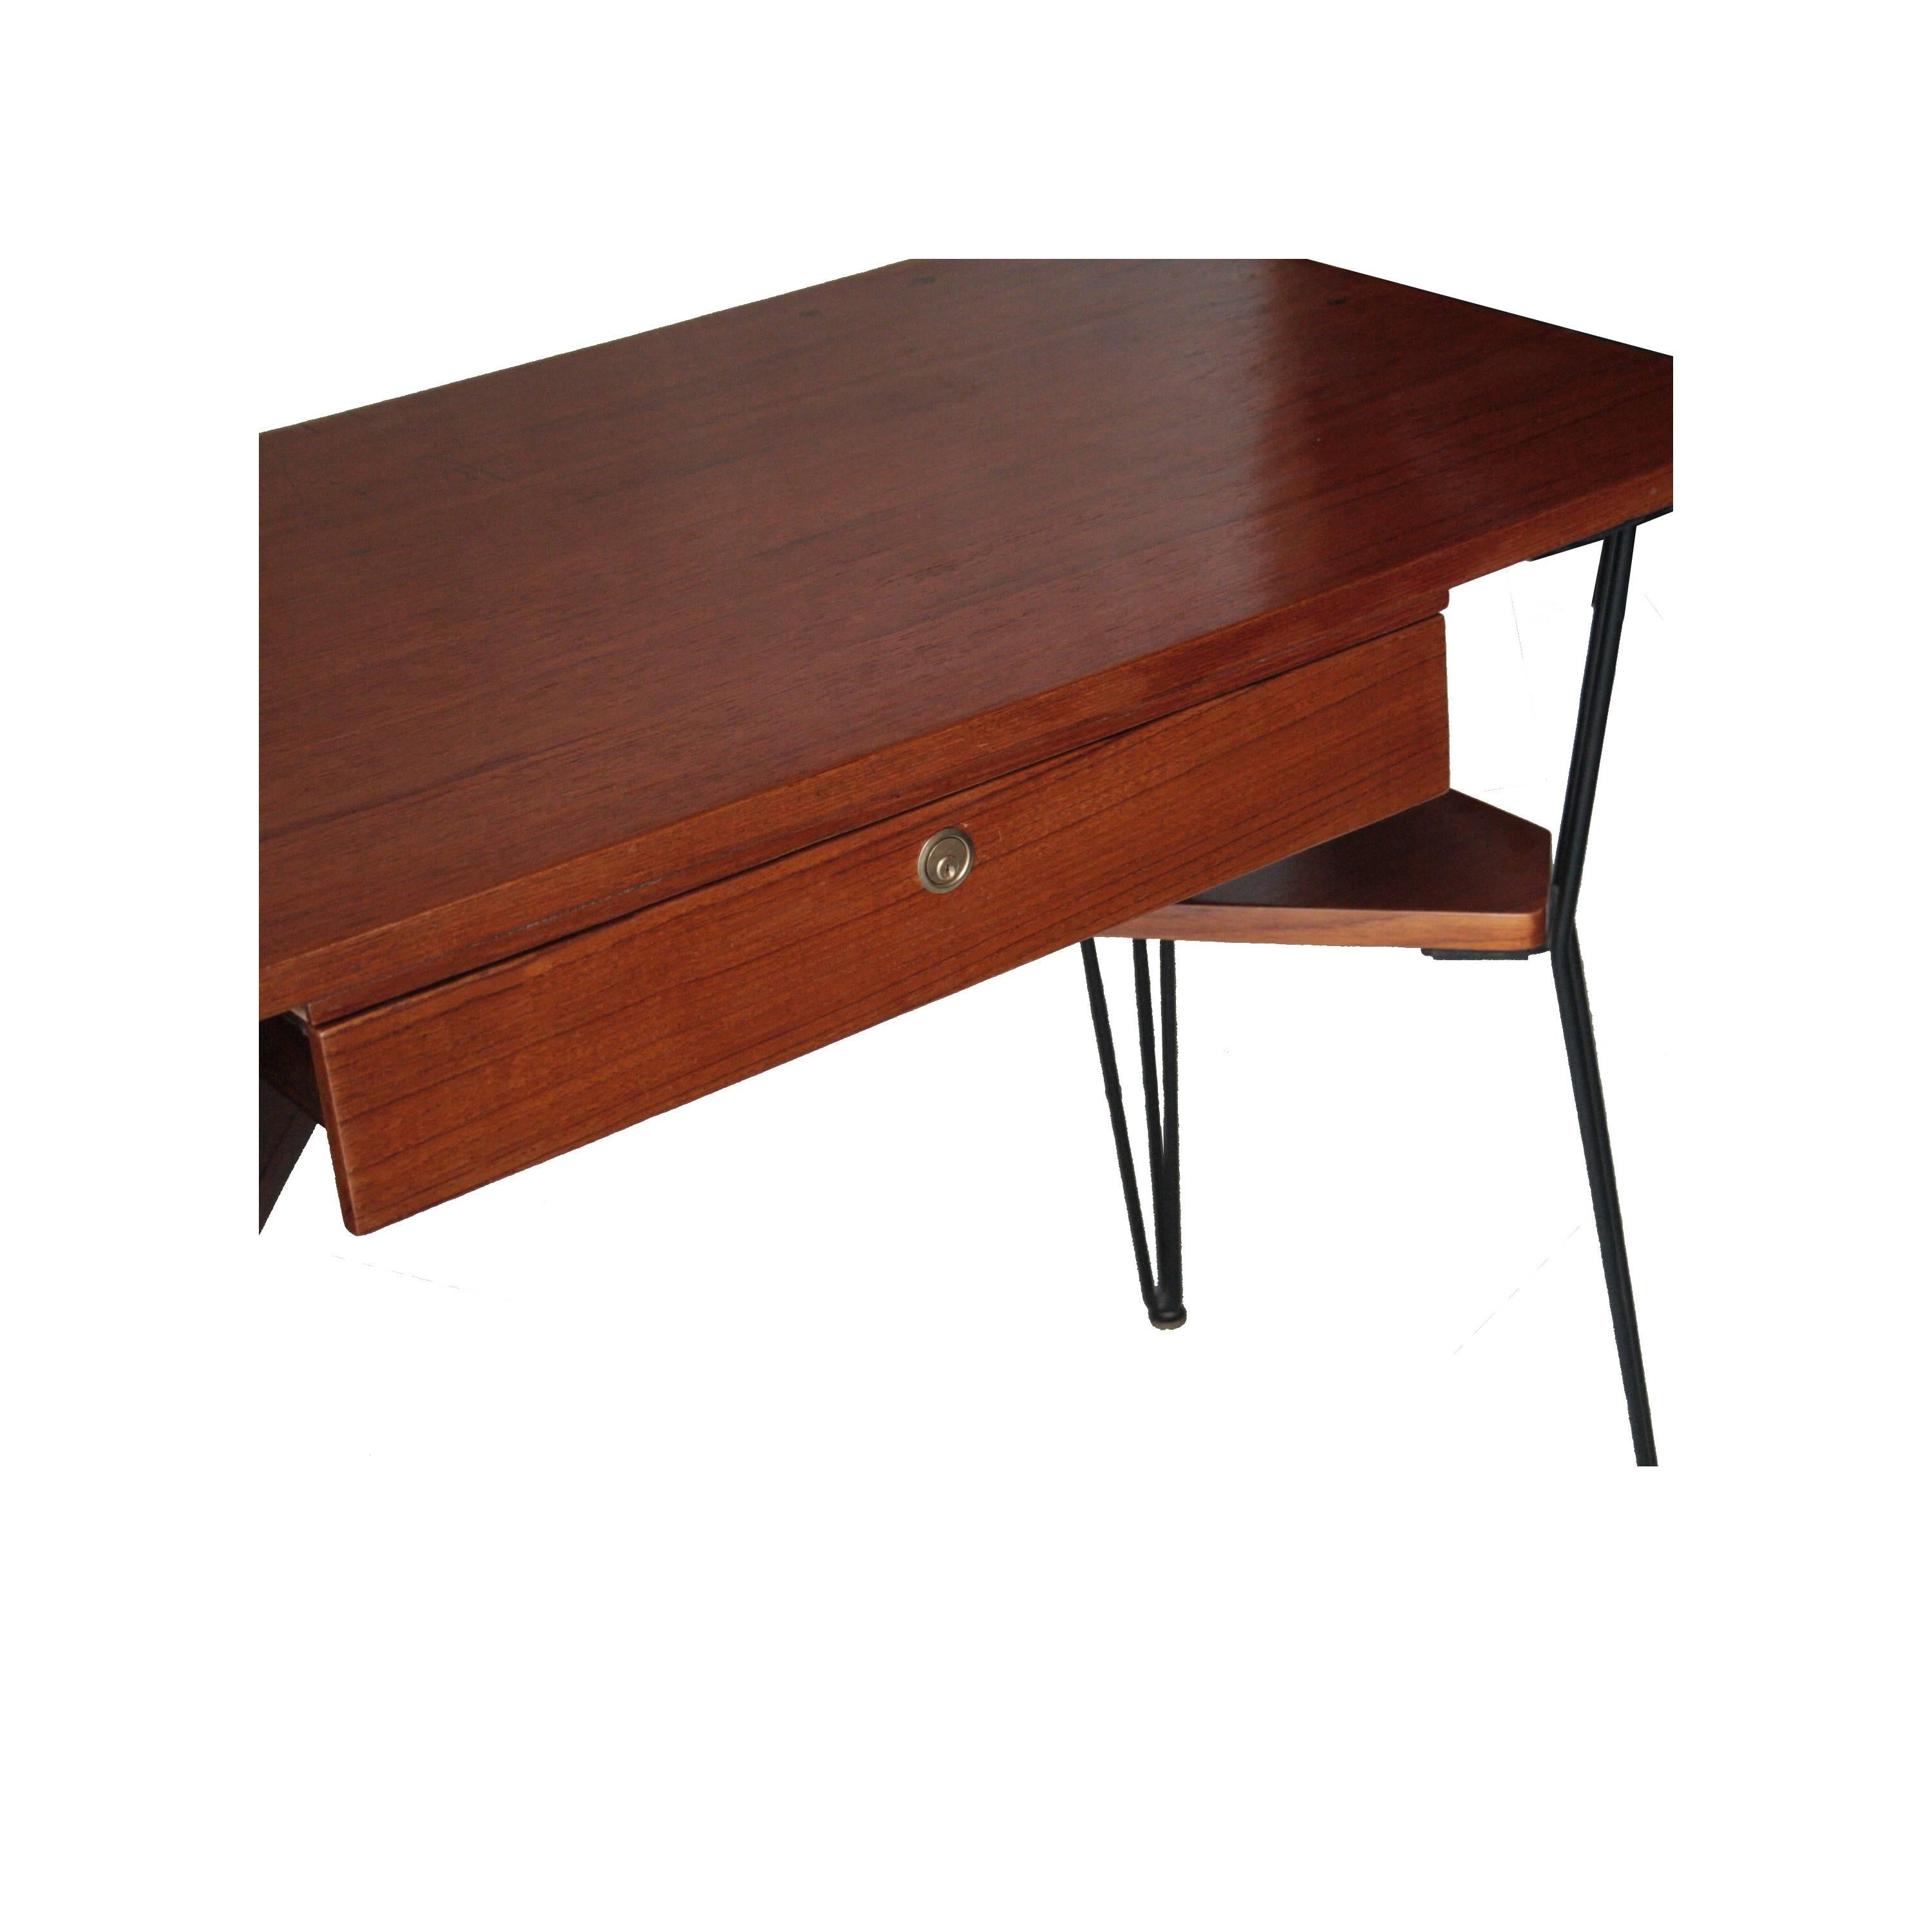 Mid-20th Century Rosewood Wooden Desk with Metallic Legs, Italy, 1950